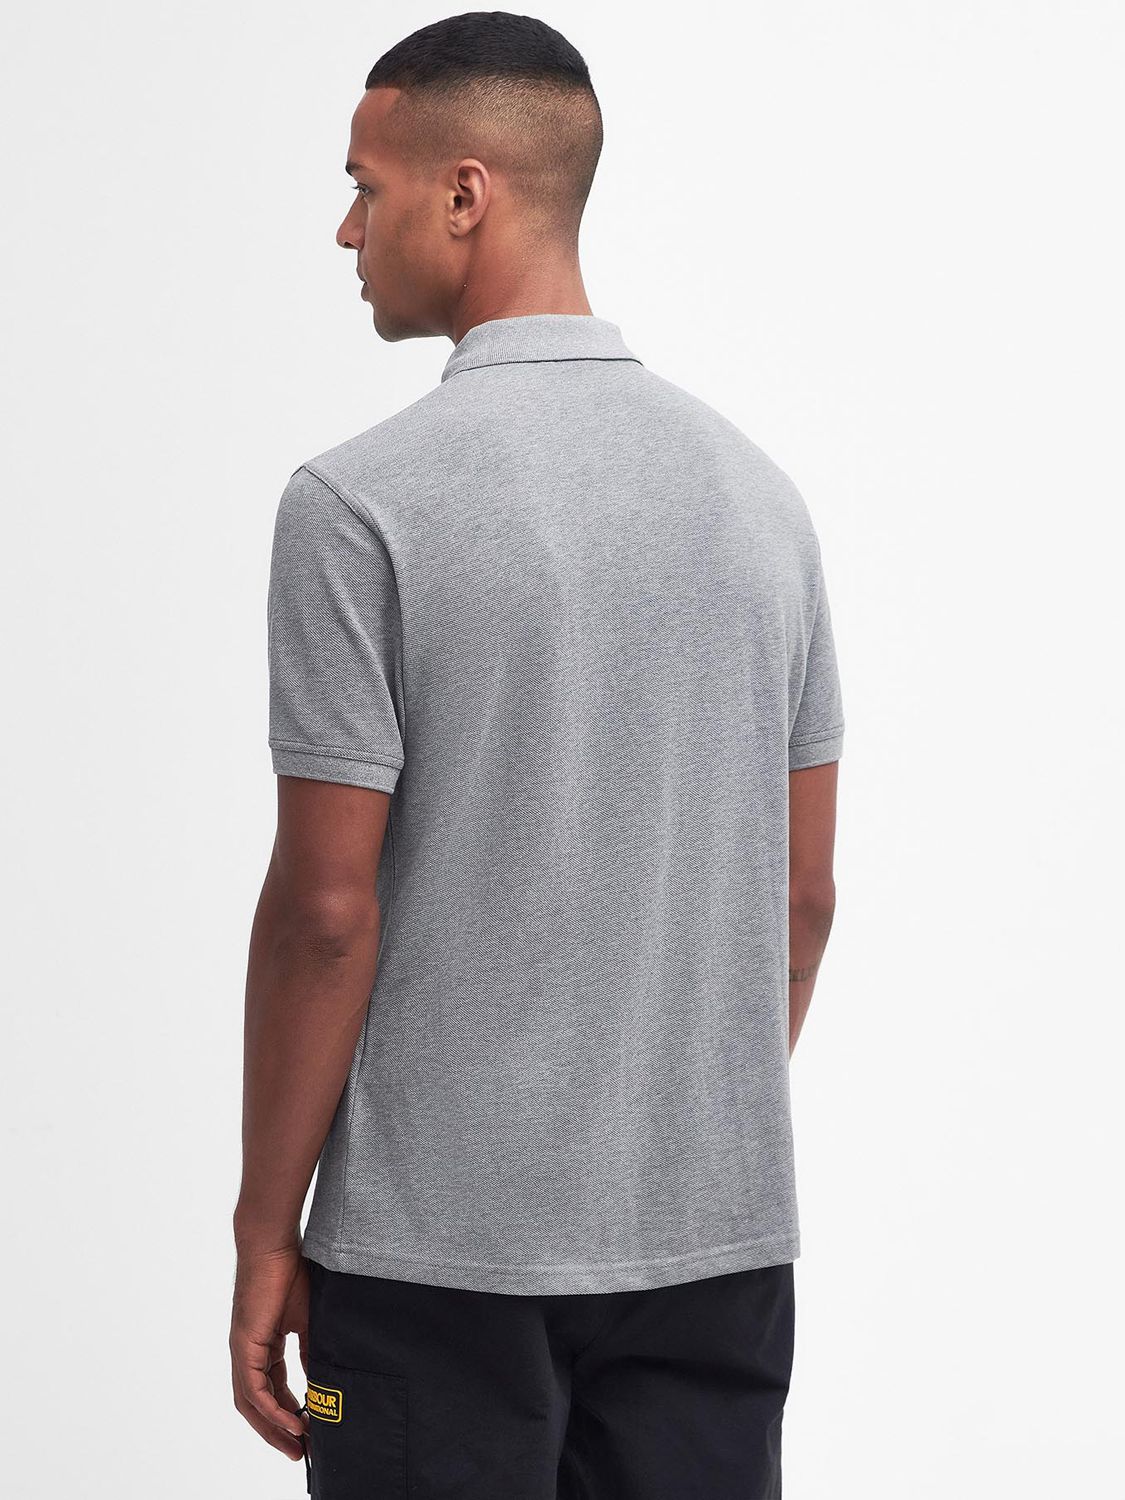 Barbour International Essential Polo Shirt, Anthracite at John Lewis ...